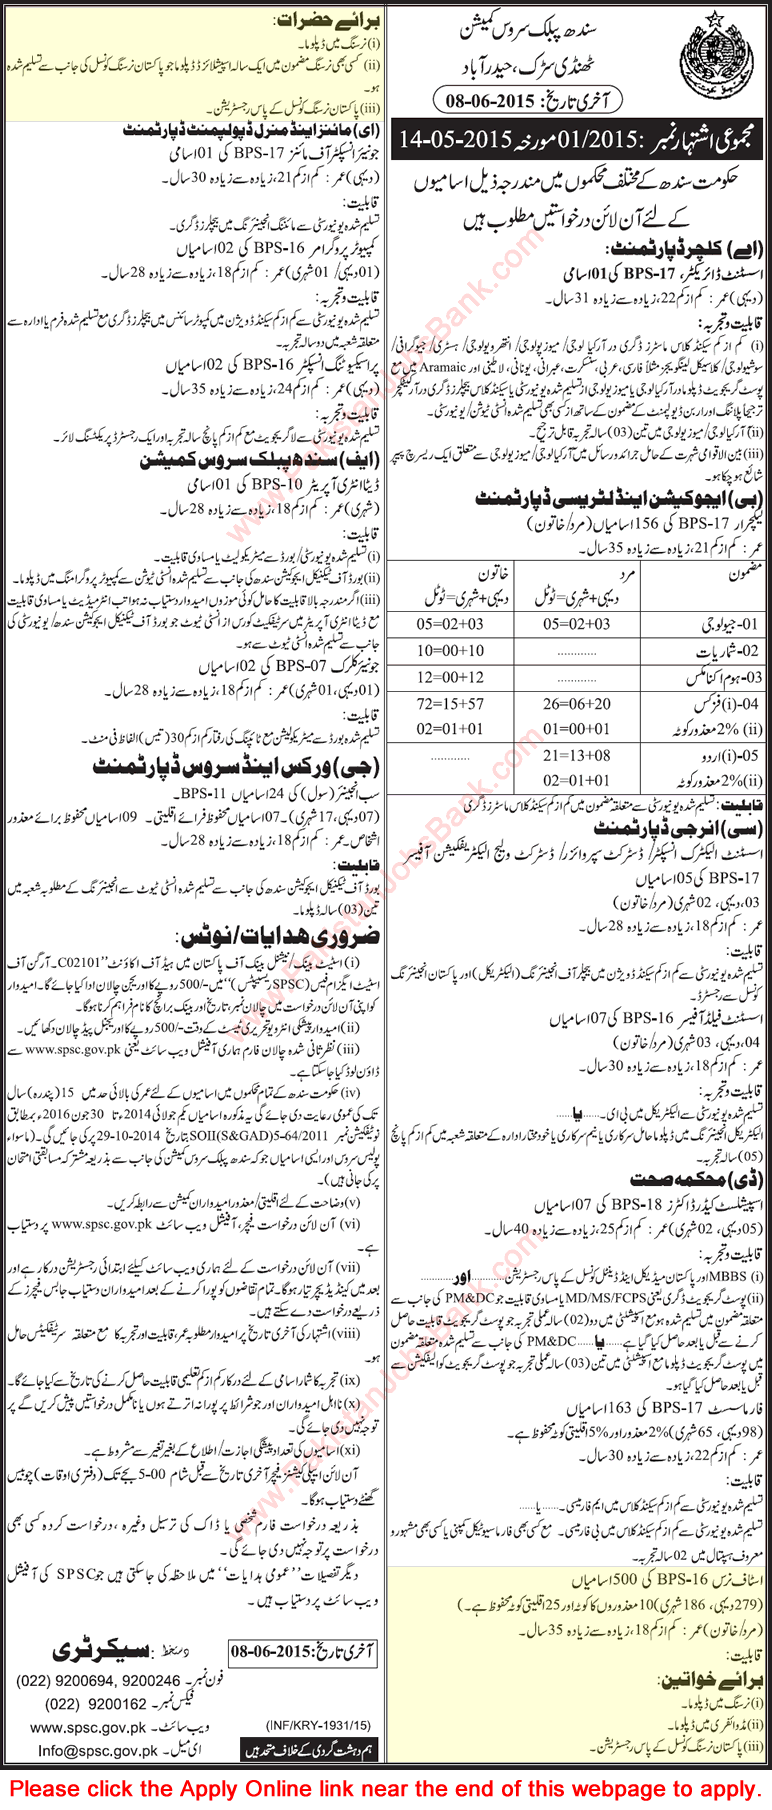 Staff Nurses Jobs in SPSC May 2015 Health Department Sindh Online Apply Male / Female Latest